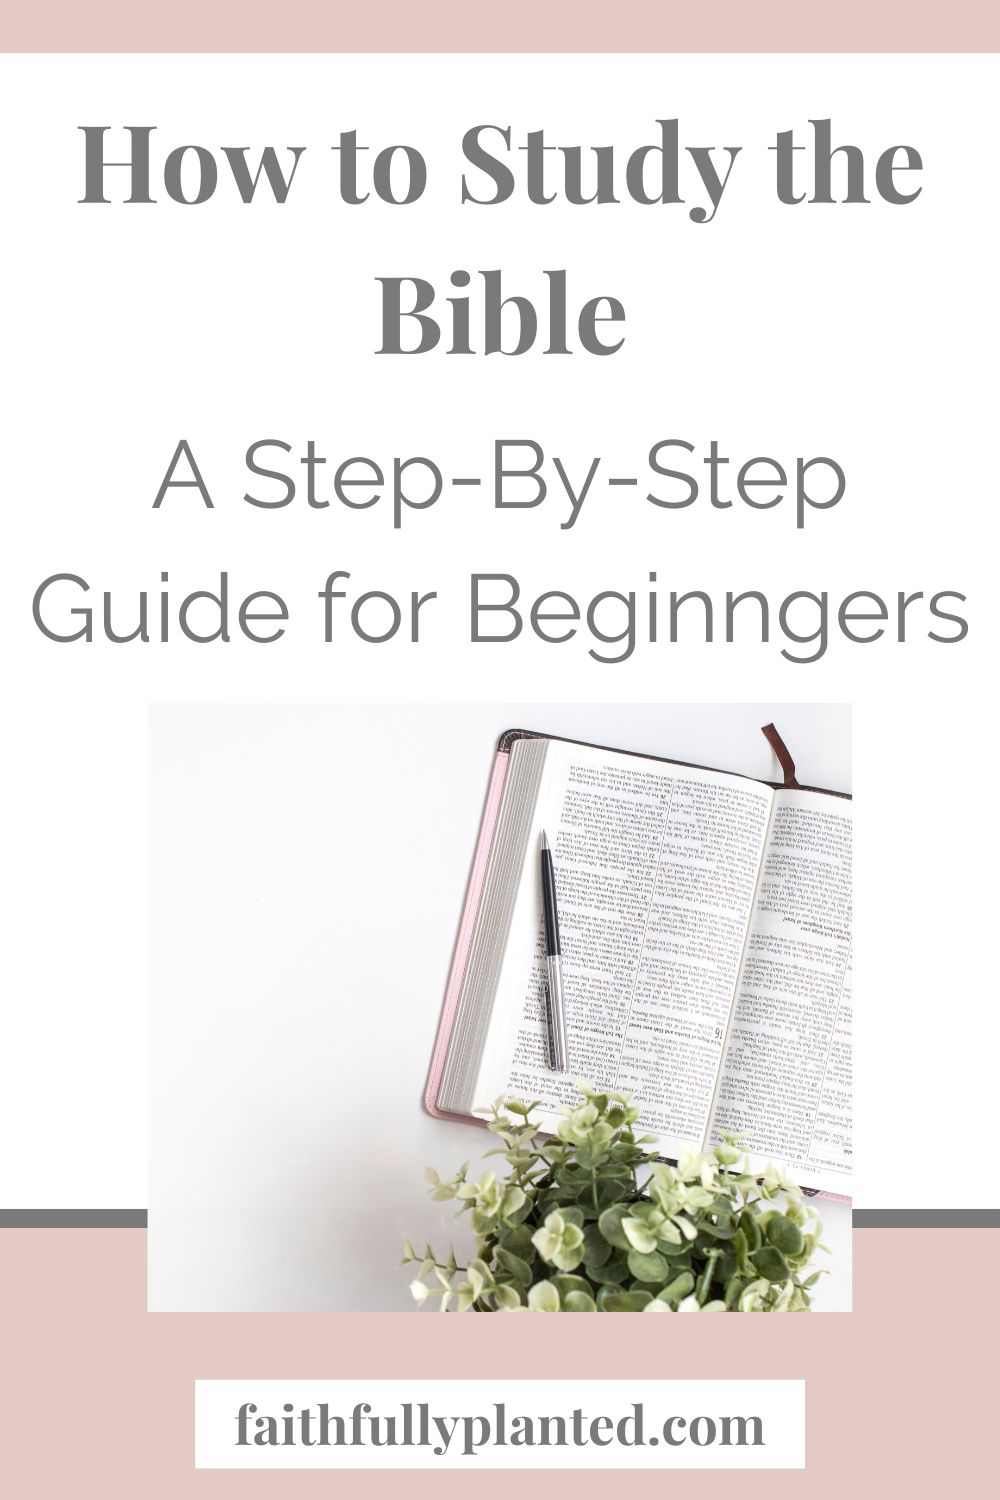 How to Study the Bible: A Complete Beginner's Guide - Faithfully